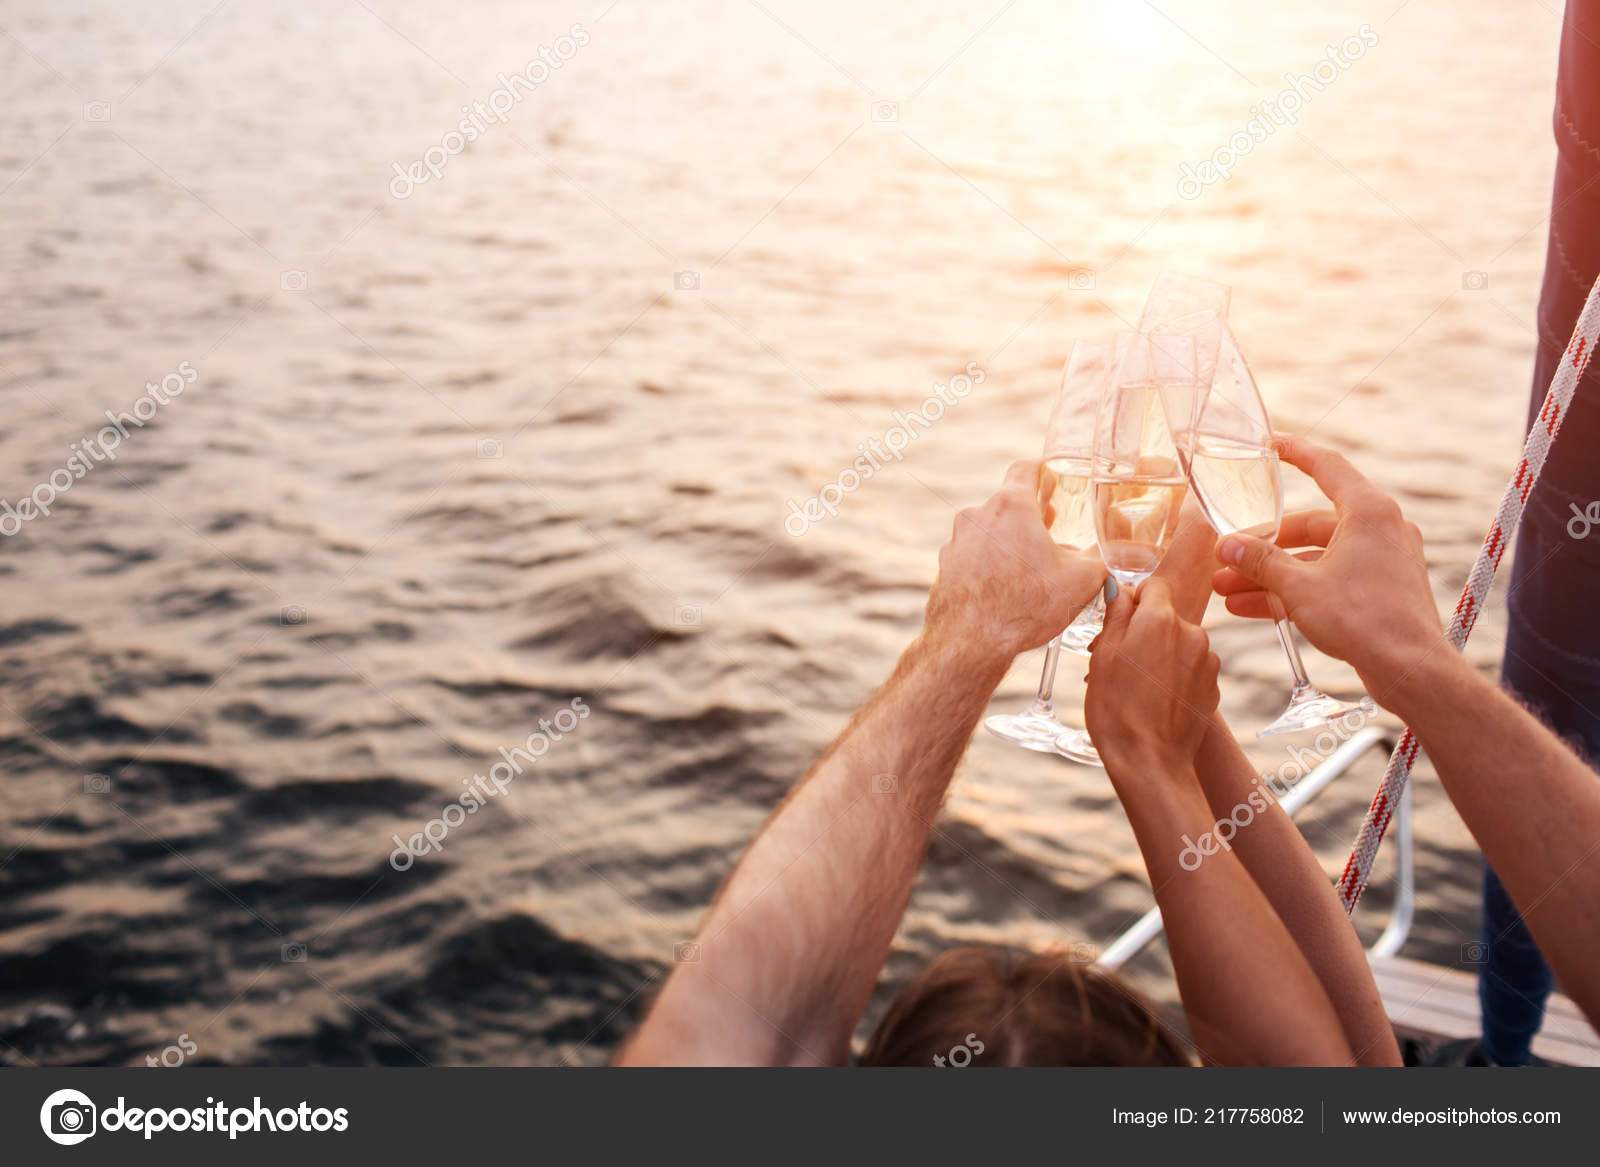 Nice Picture Of Four Hands Holding Glasses Of Champaigne In Front Of Water They Have Some Rest